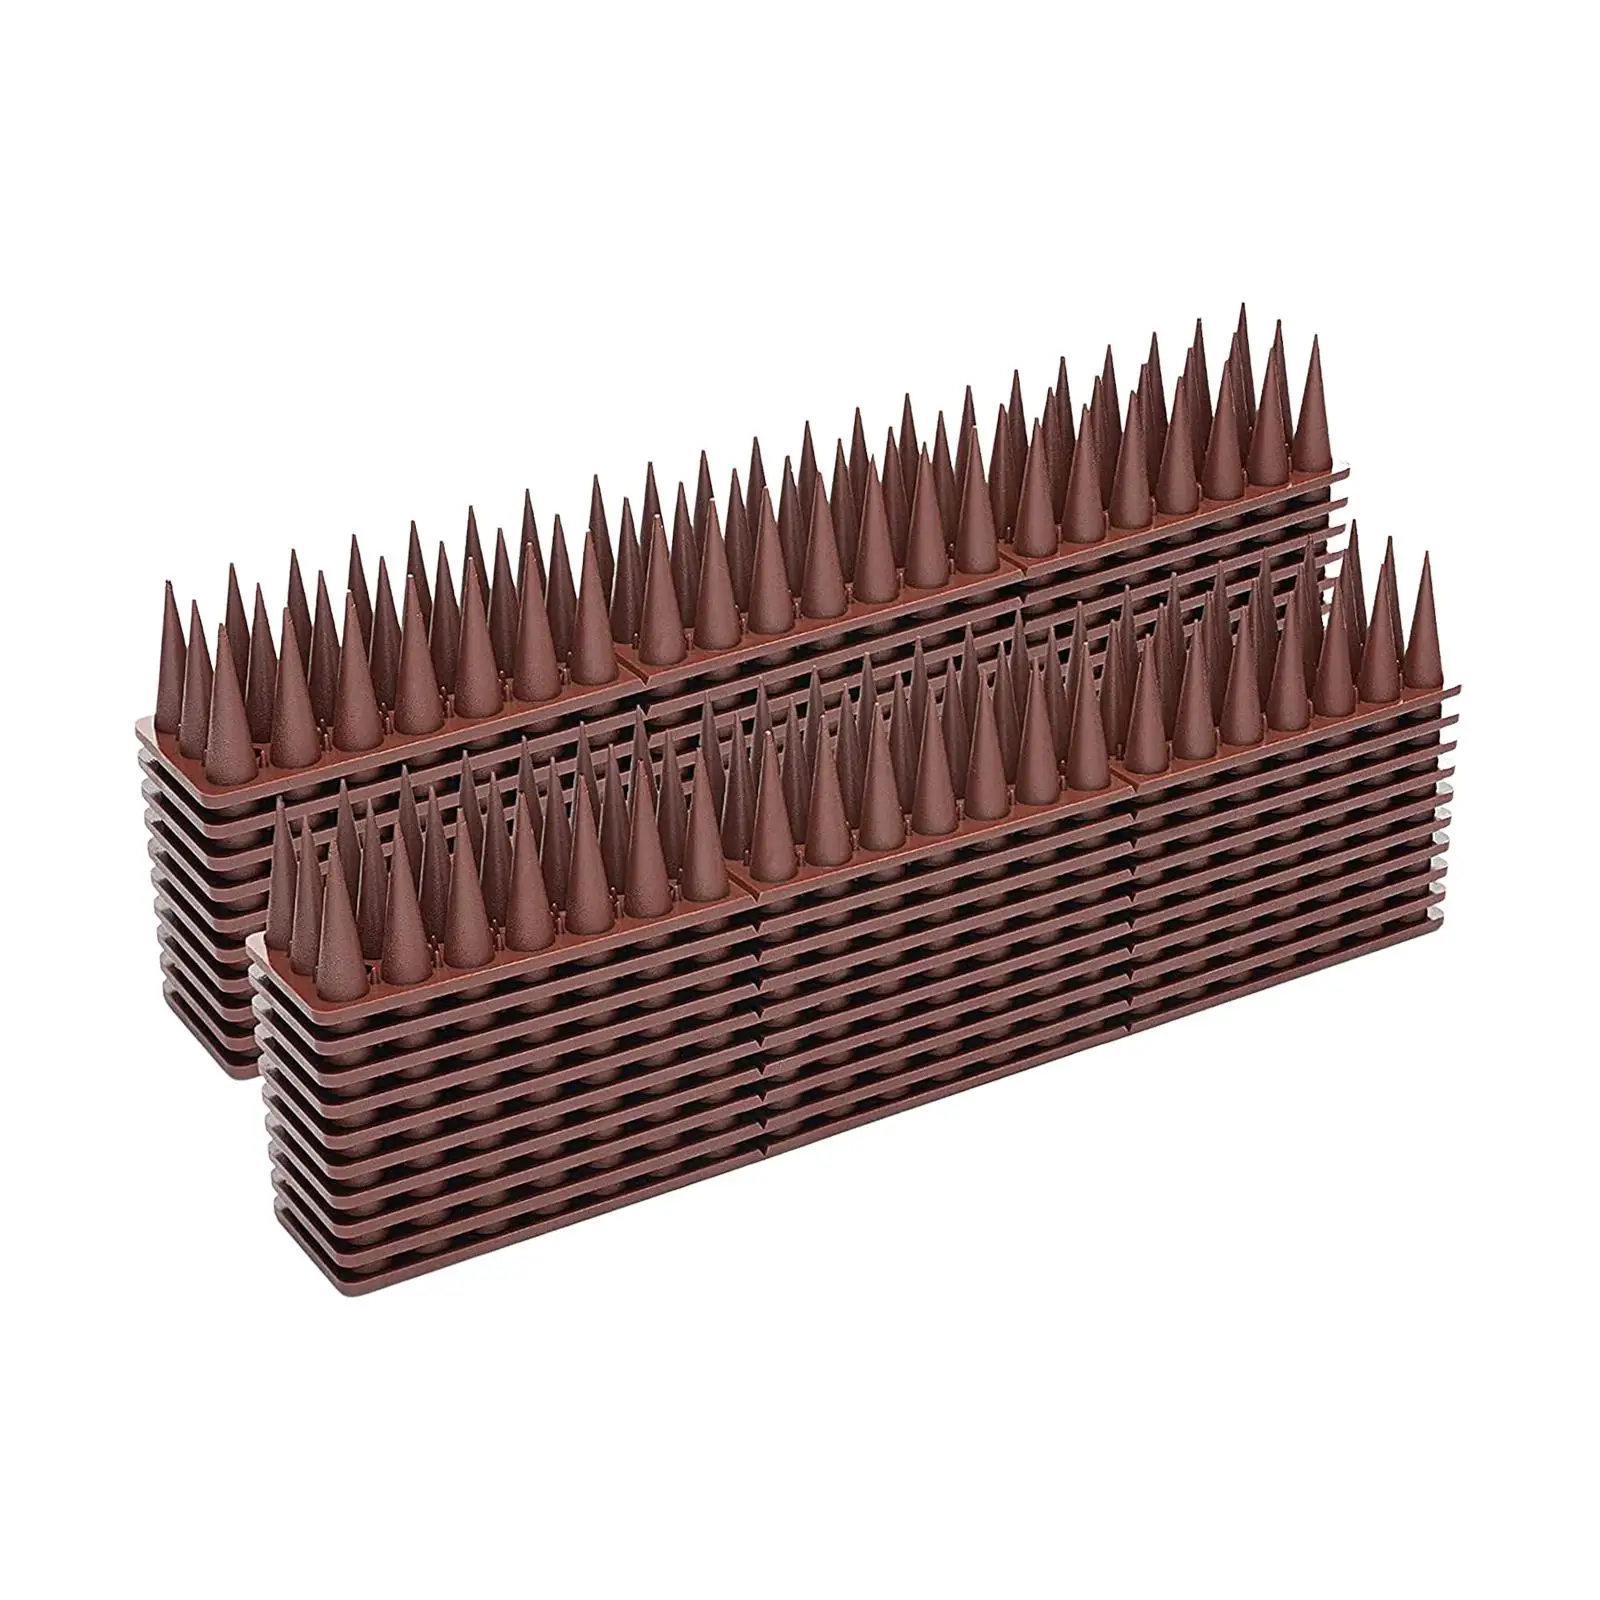 

20x Bird Deterrent Spikes Small Birds Spikes Birdproof Spikes Fence Spikes Wall Spikes for Raccoon Cats Pigeons Crow Squirrel